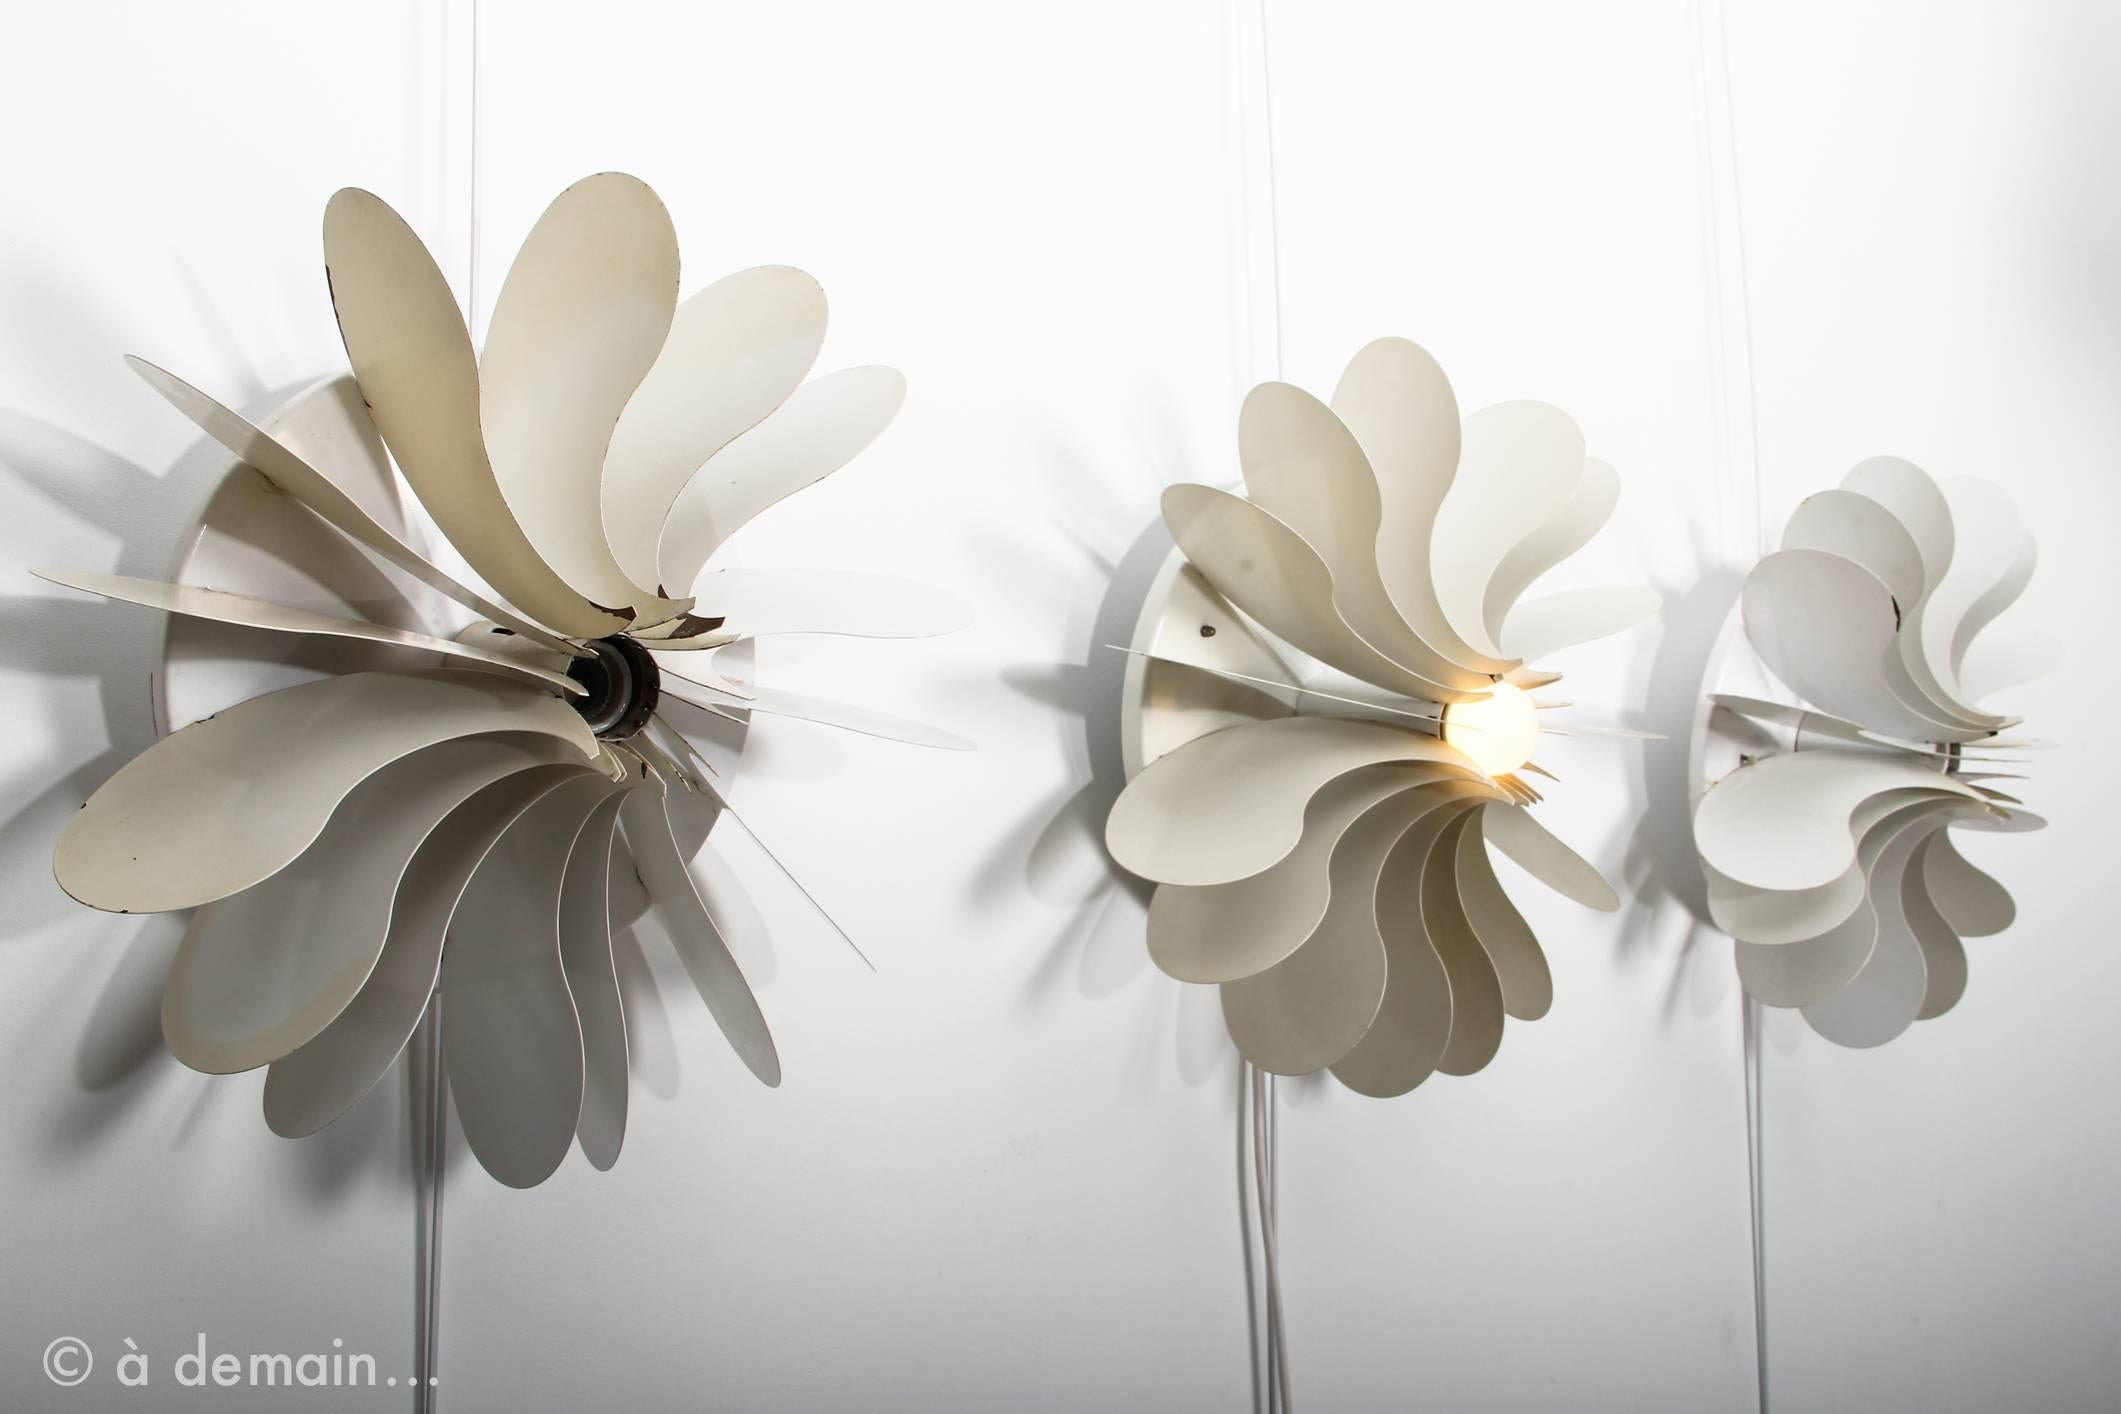 Bolide B1095 Ceiling or Wall Lamp by Hermian Sneyders de Vogel produced by Raak Amsterdam, 1971.
Pretty model which makes a very beautiful light that comes by between each of the wings. Attractive light and shadow effects. 

Made of white